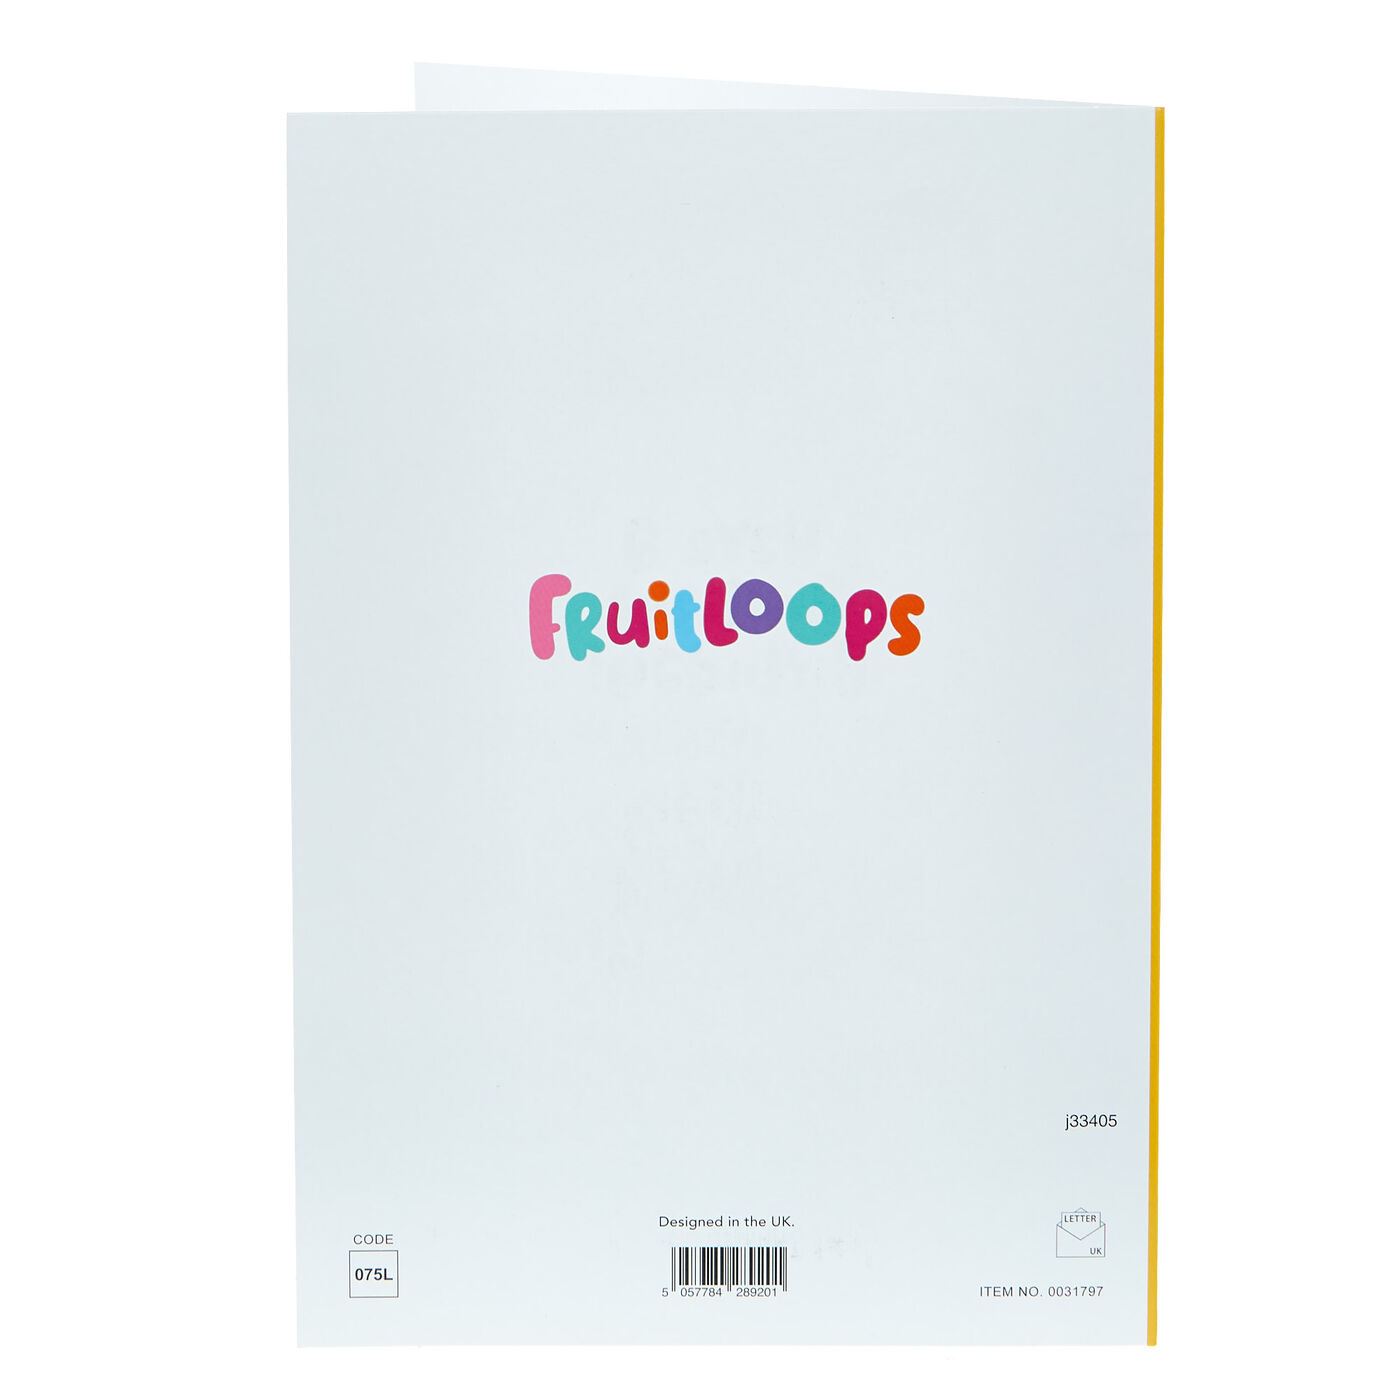 Buy Fruitloops 18th Birthday Card The Worlds Your Oyster For Gbp 099 Card Factory Uk 4857